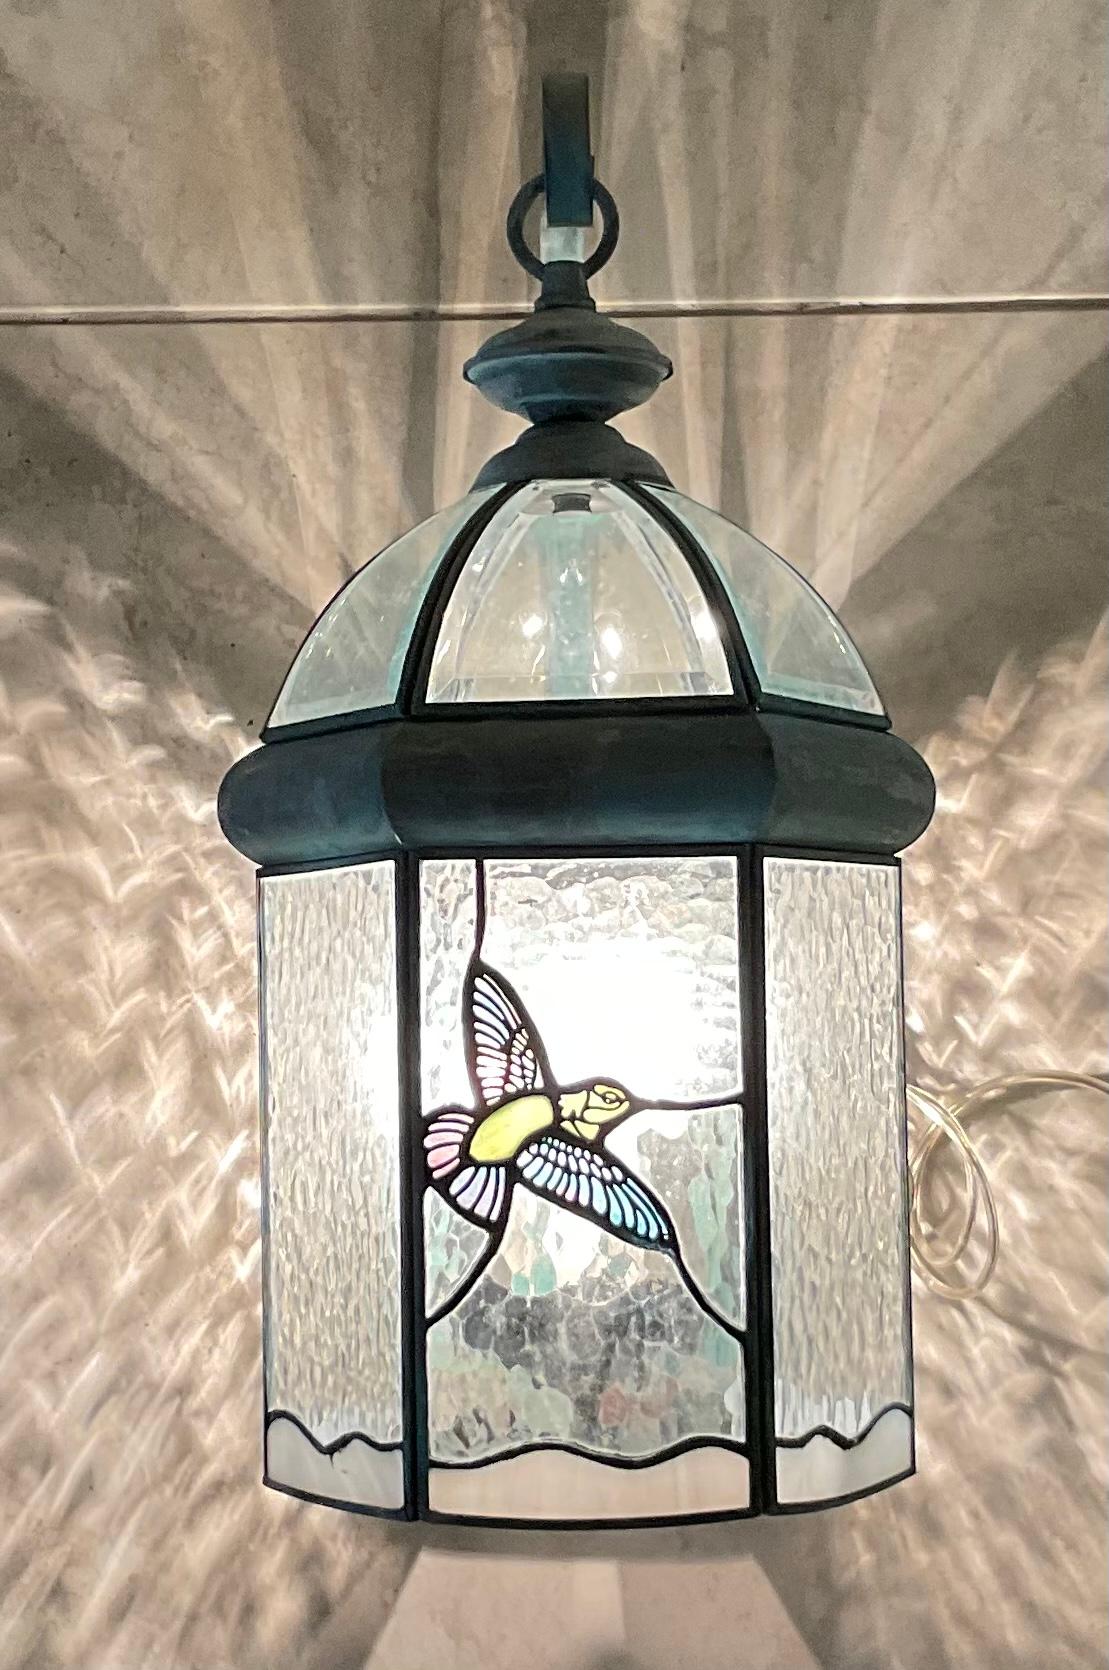 Funky vintage wall lantern handcrafted from solid brass, seeded glass, and three 40/watt lights suitable for wet location. Artistic glass bird motif on front.